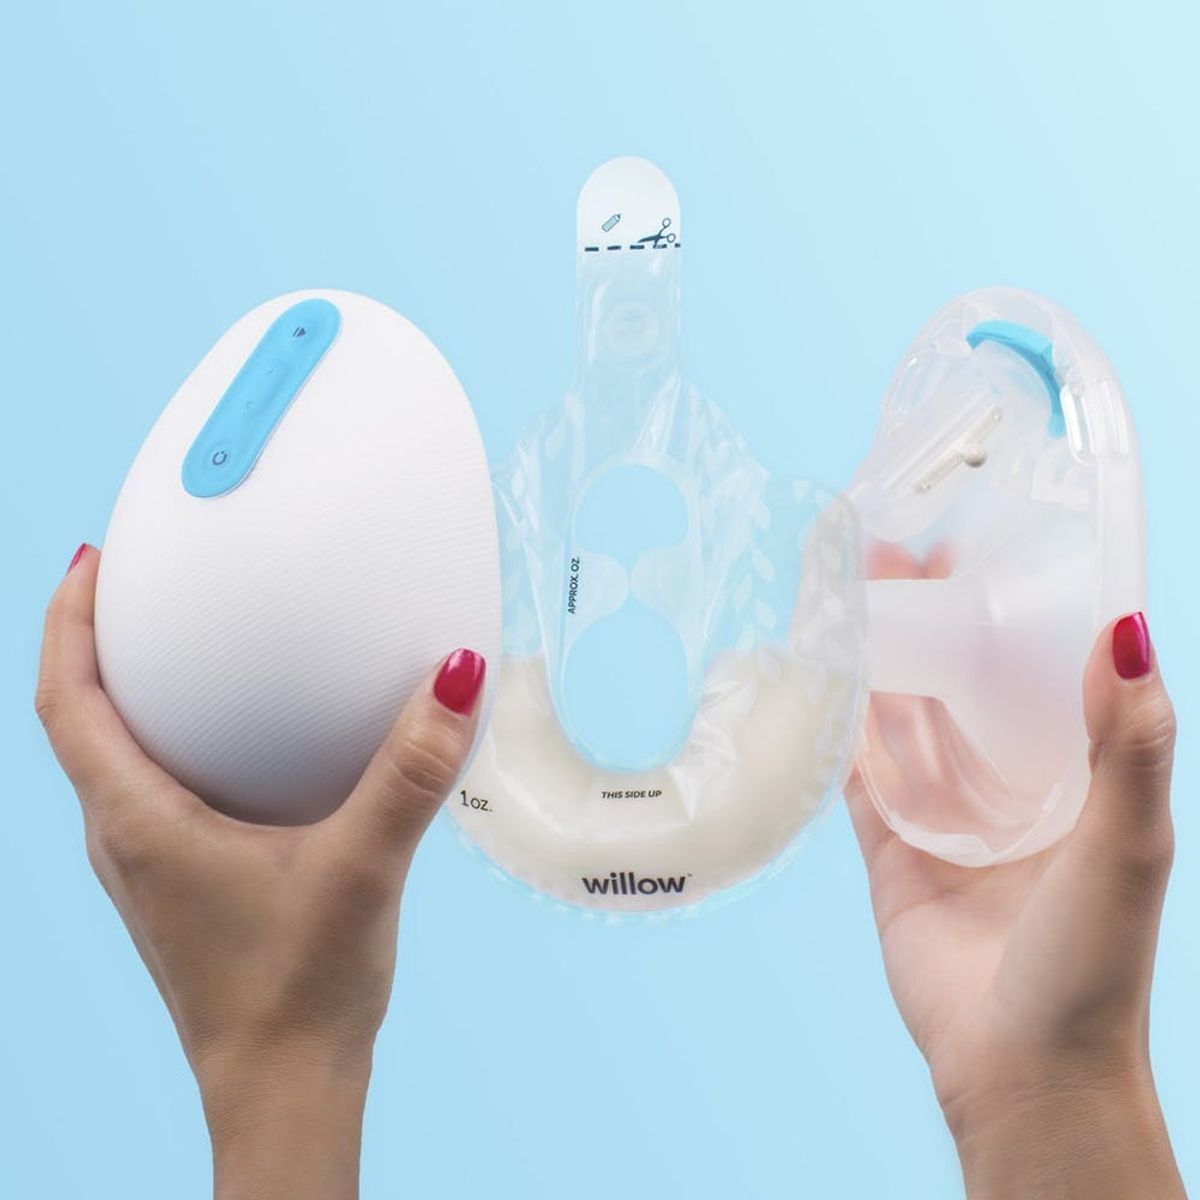 This Is the Hands-Free Breast Pump All New Moms Have Been Waiting For